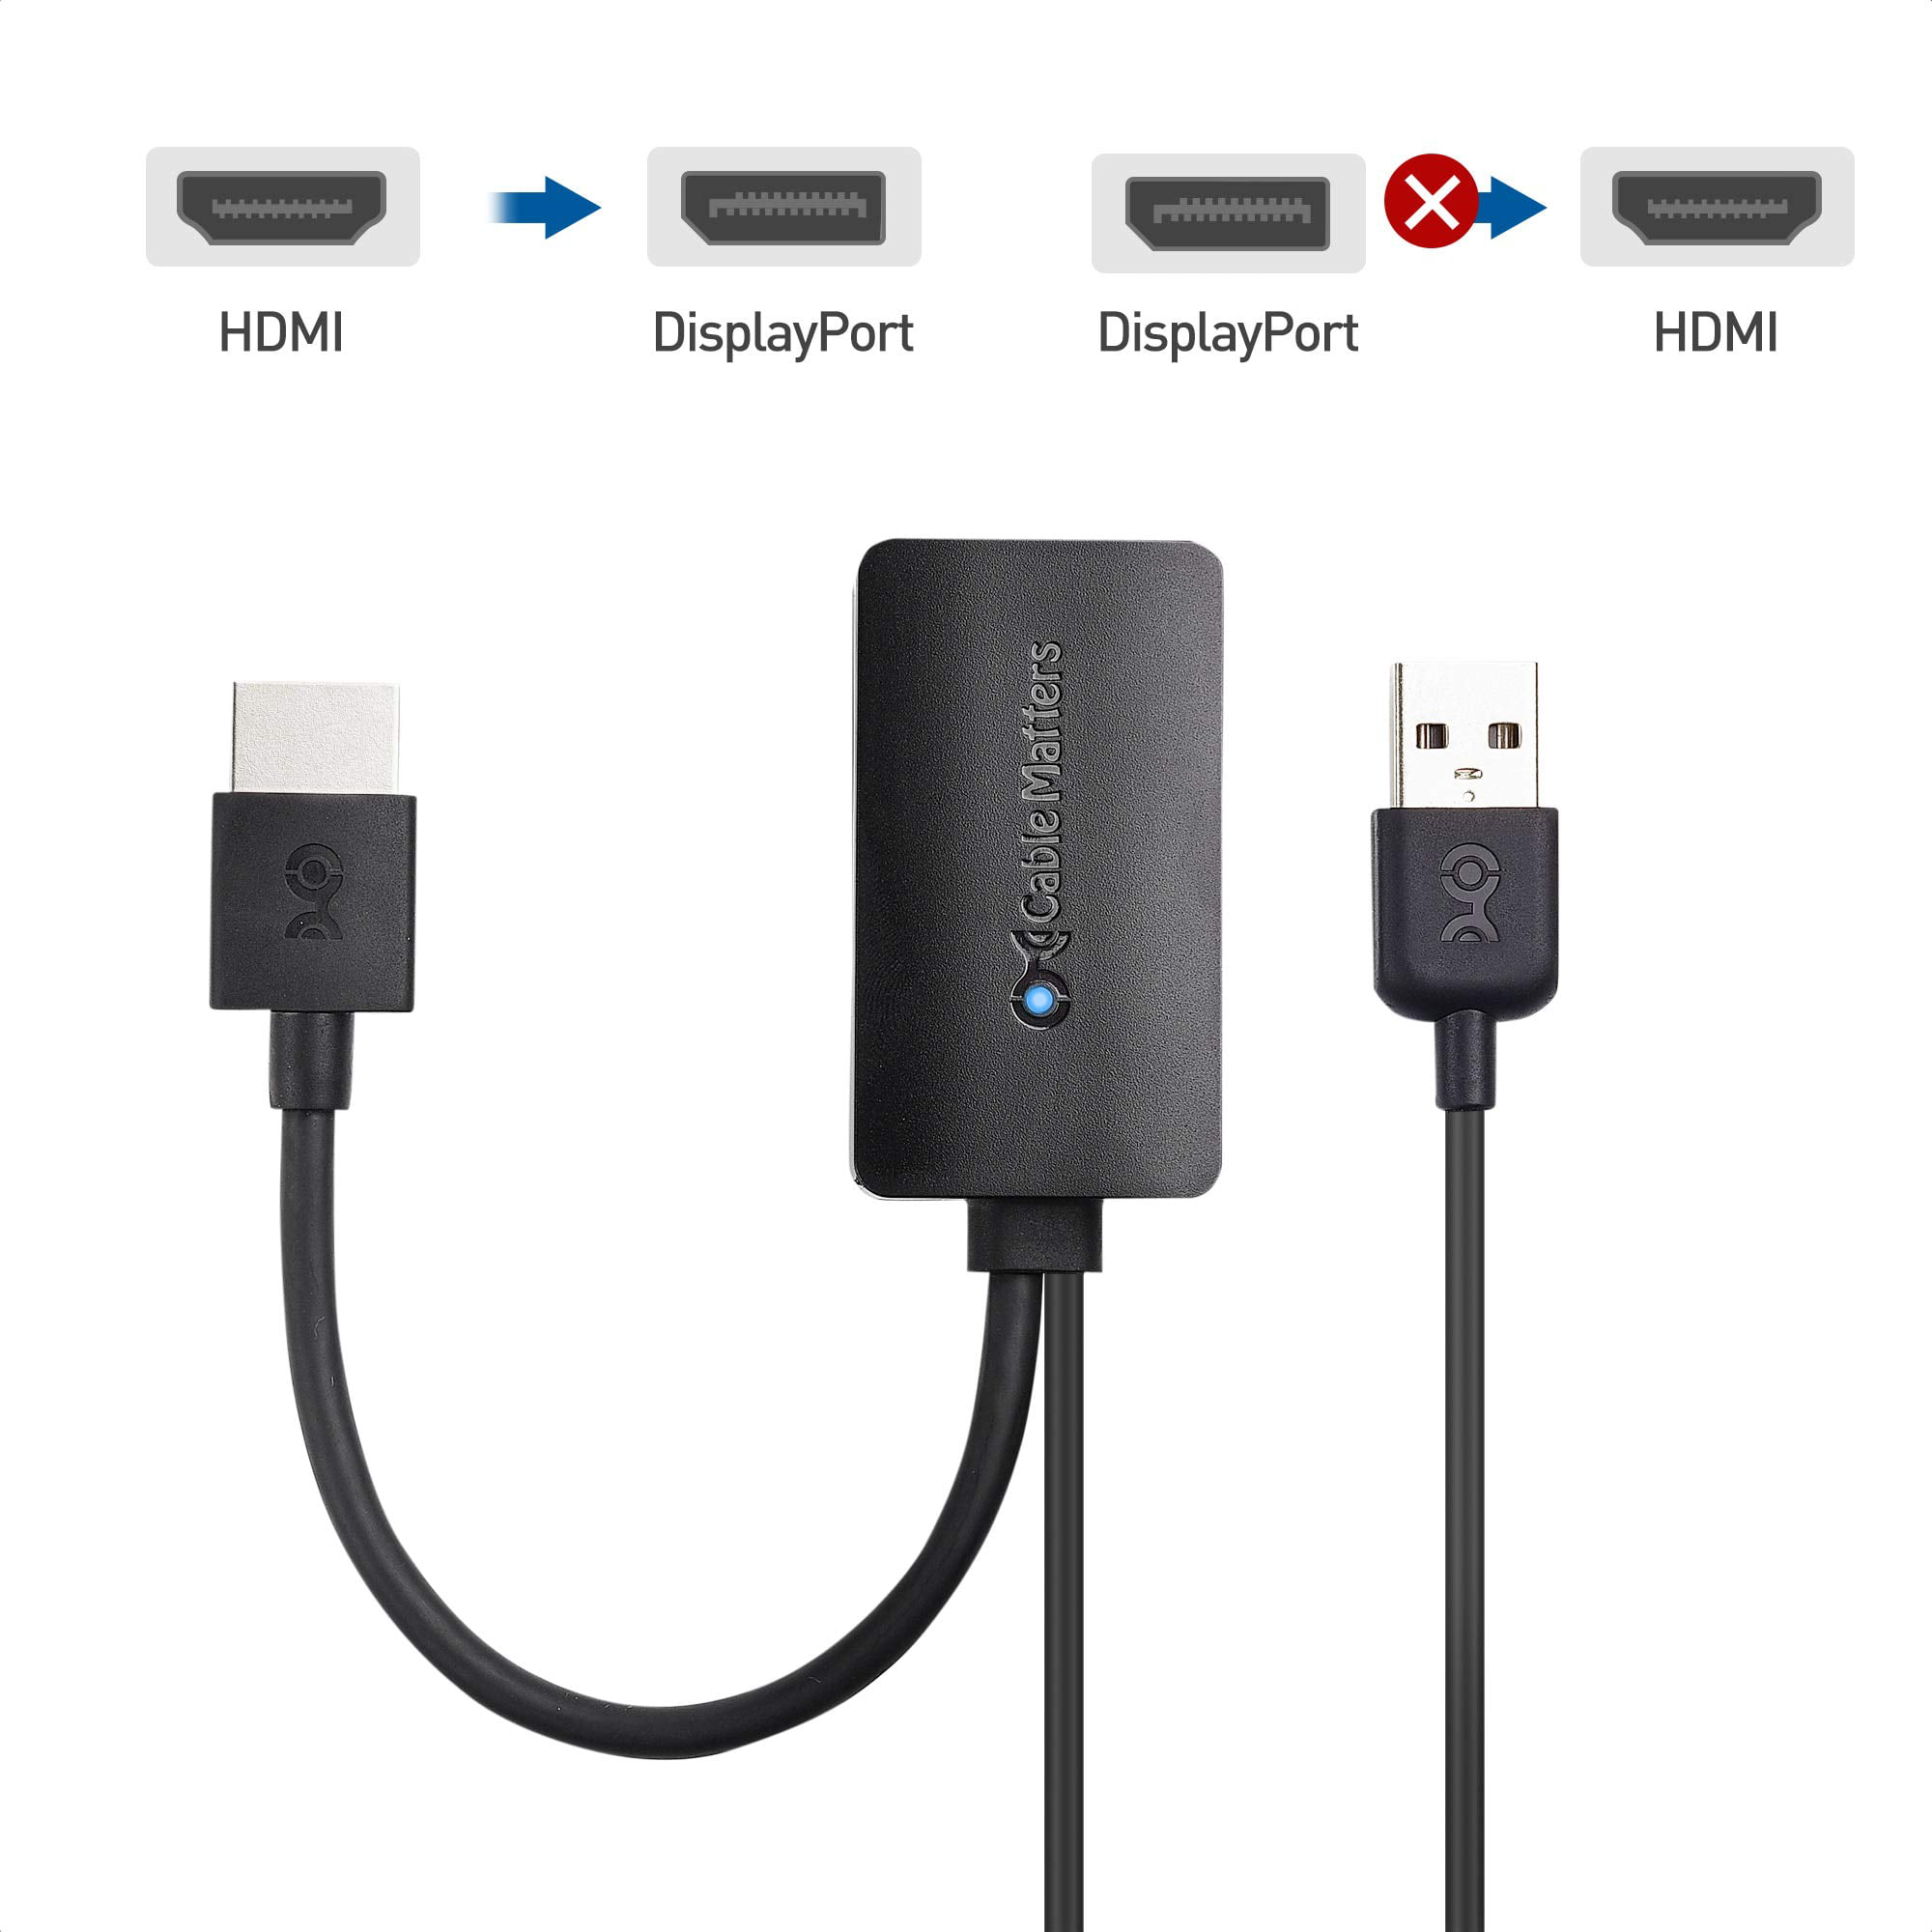 Cable Matters Uni Directional Hdmi To Displayport Adapter For Desktop And Laptop Computers Hdmi 2 0 To Displayport 1 2 With 4k 60hz Video Resolution Not Compatible With Ps5 Or Xbox Series X S